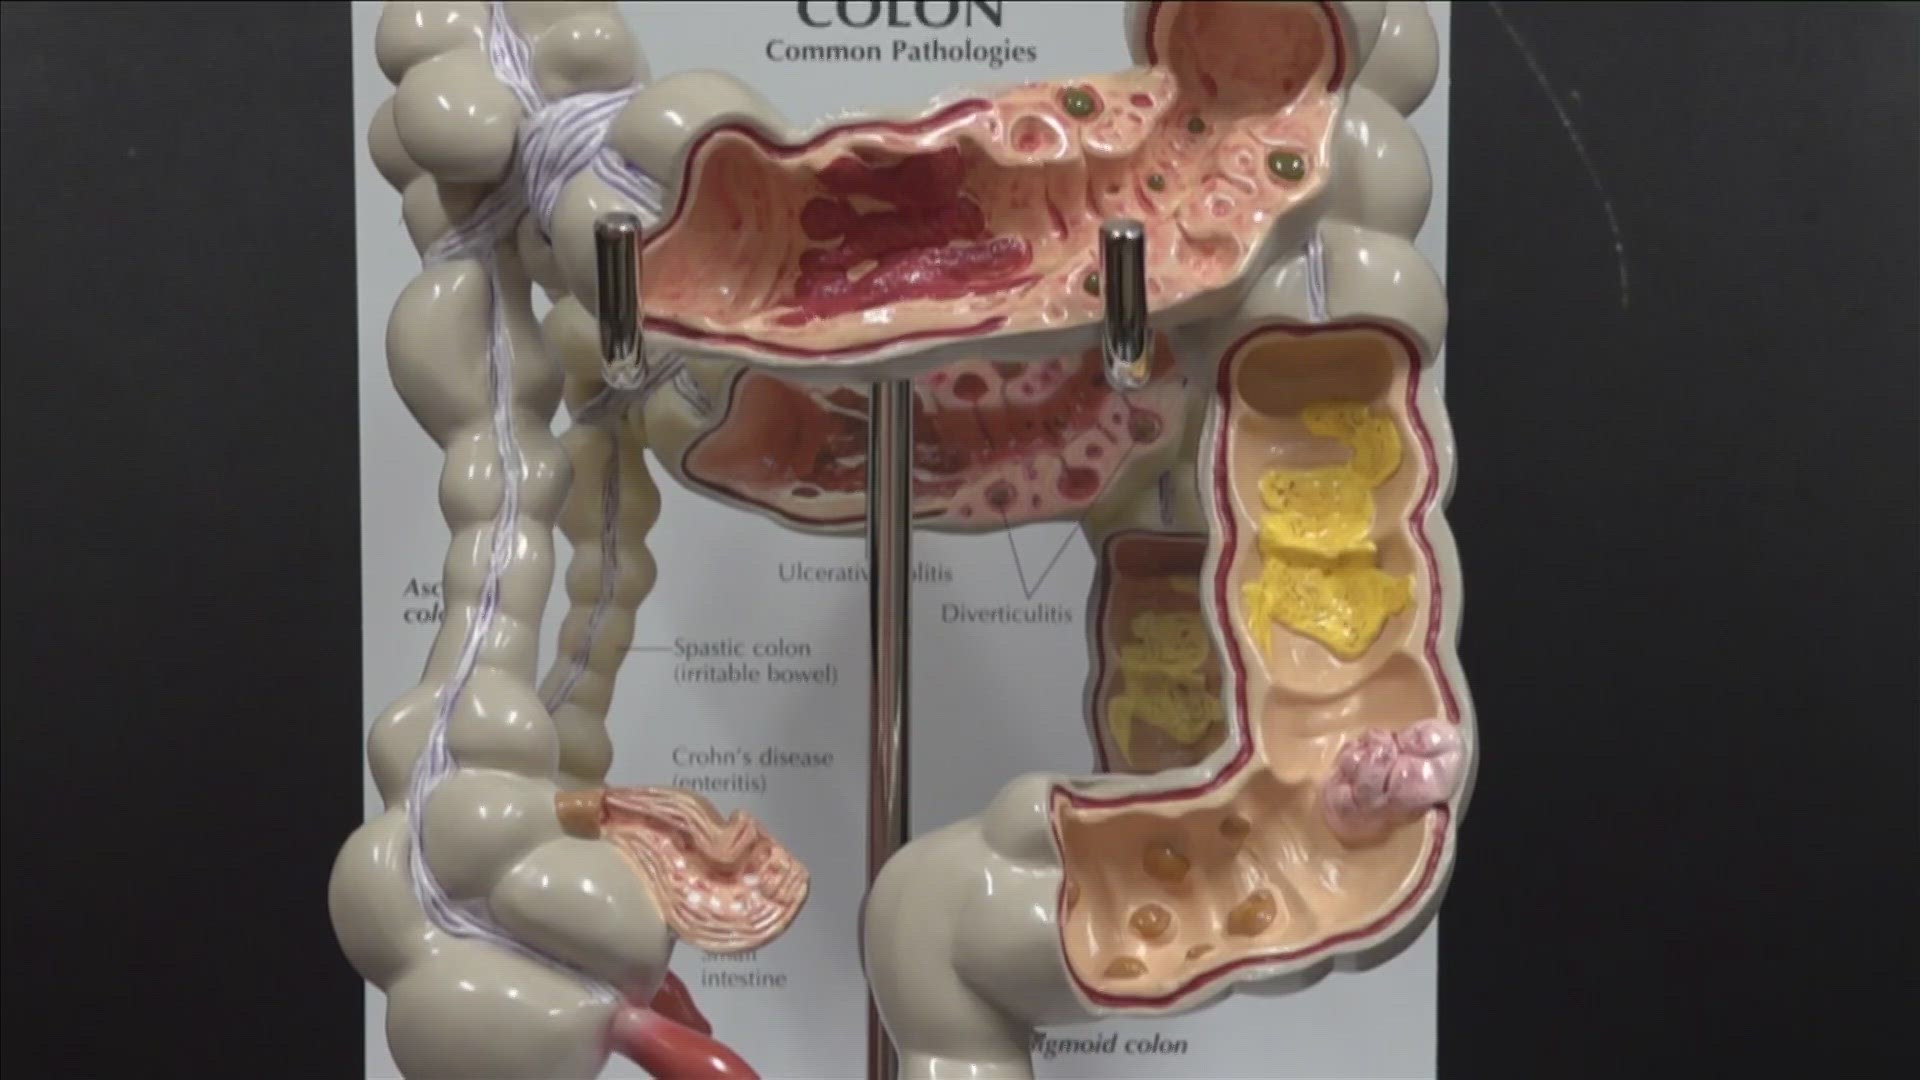 March is Colorectal Cancer Awareness Month. Doctors recommend people get screened for colon cancer after turning 45.